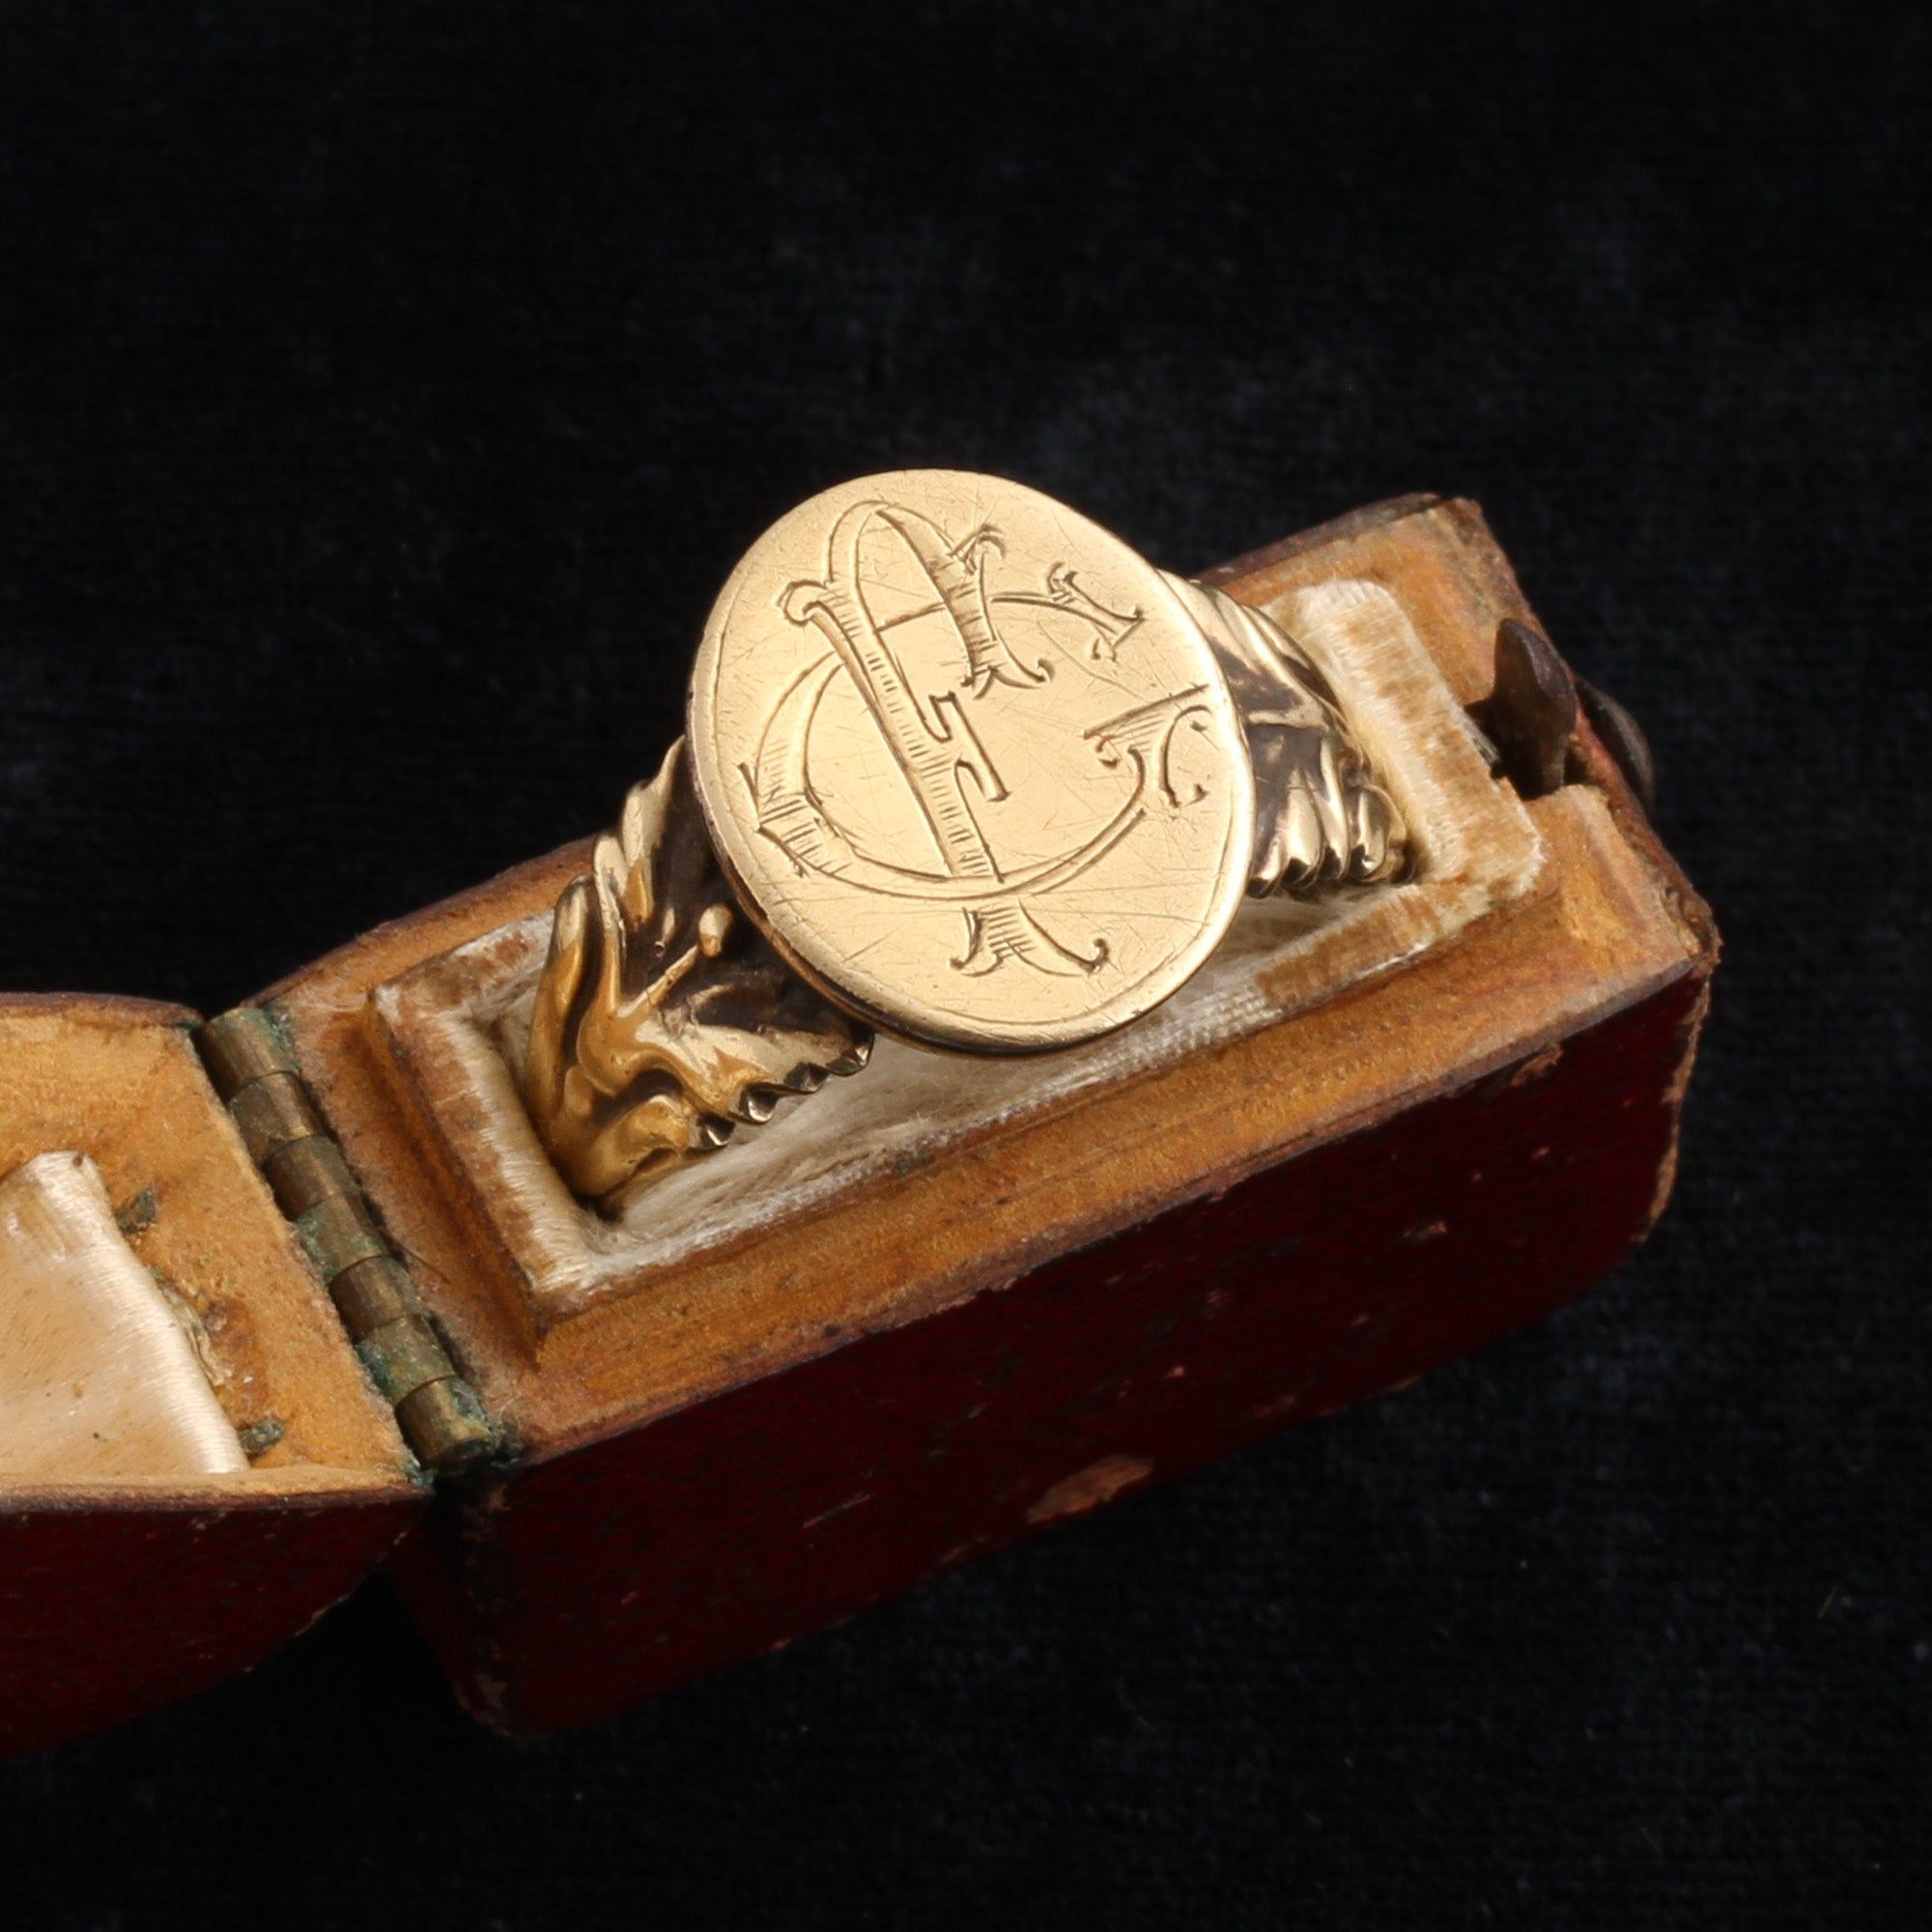 Early 20th Century "FG" Signet Ring